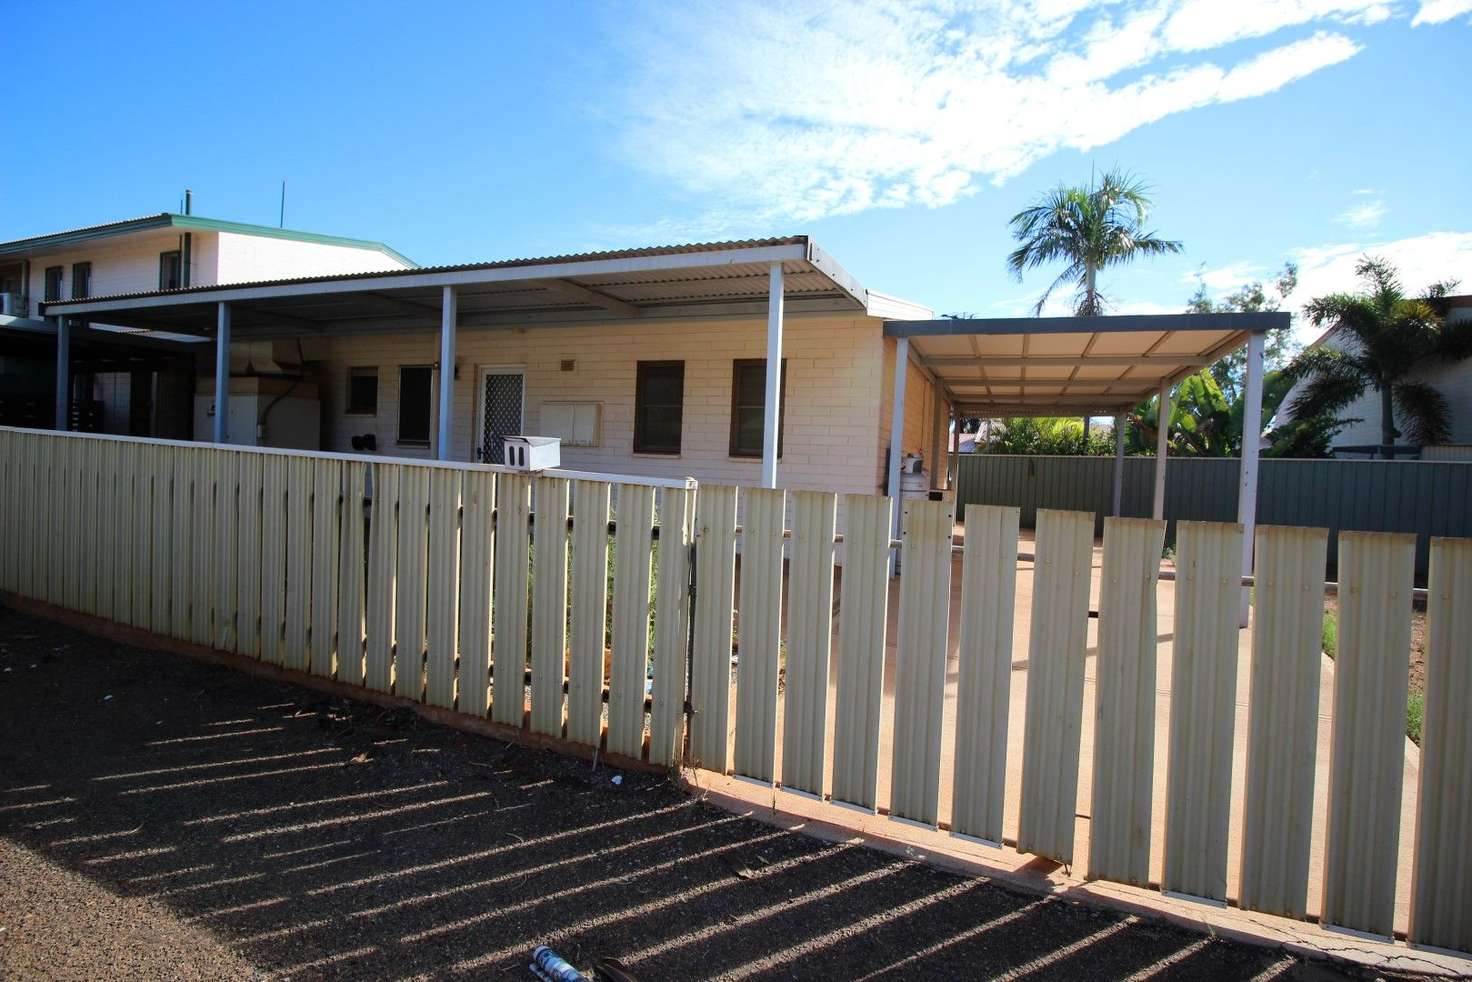 Main view of Homely house listing, 11 Judith Way, South Hedland WA 6722